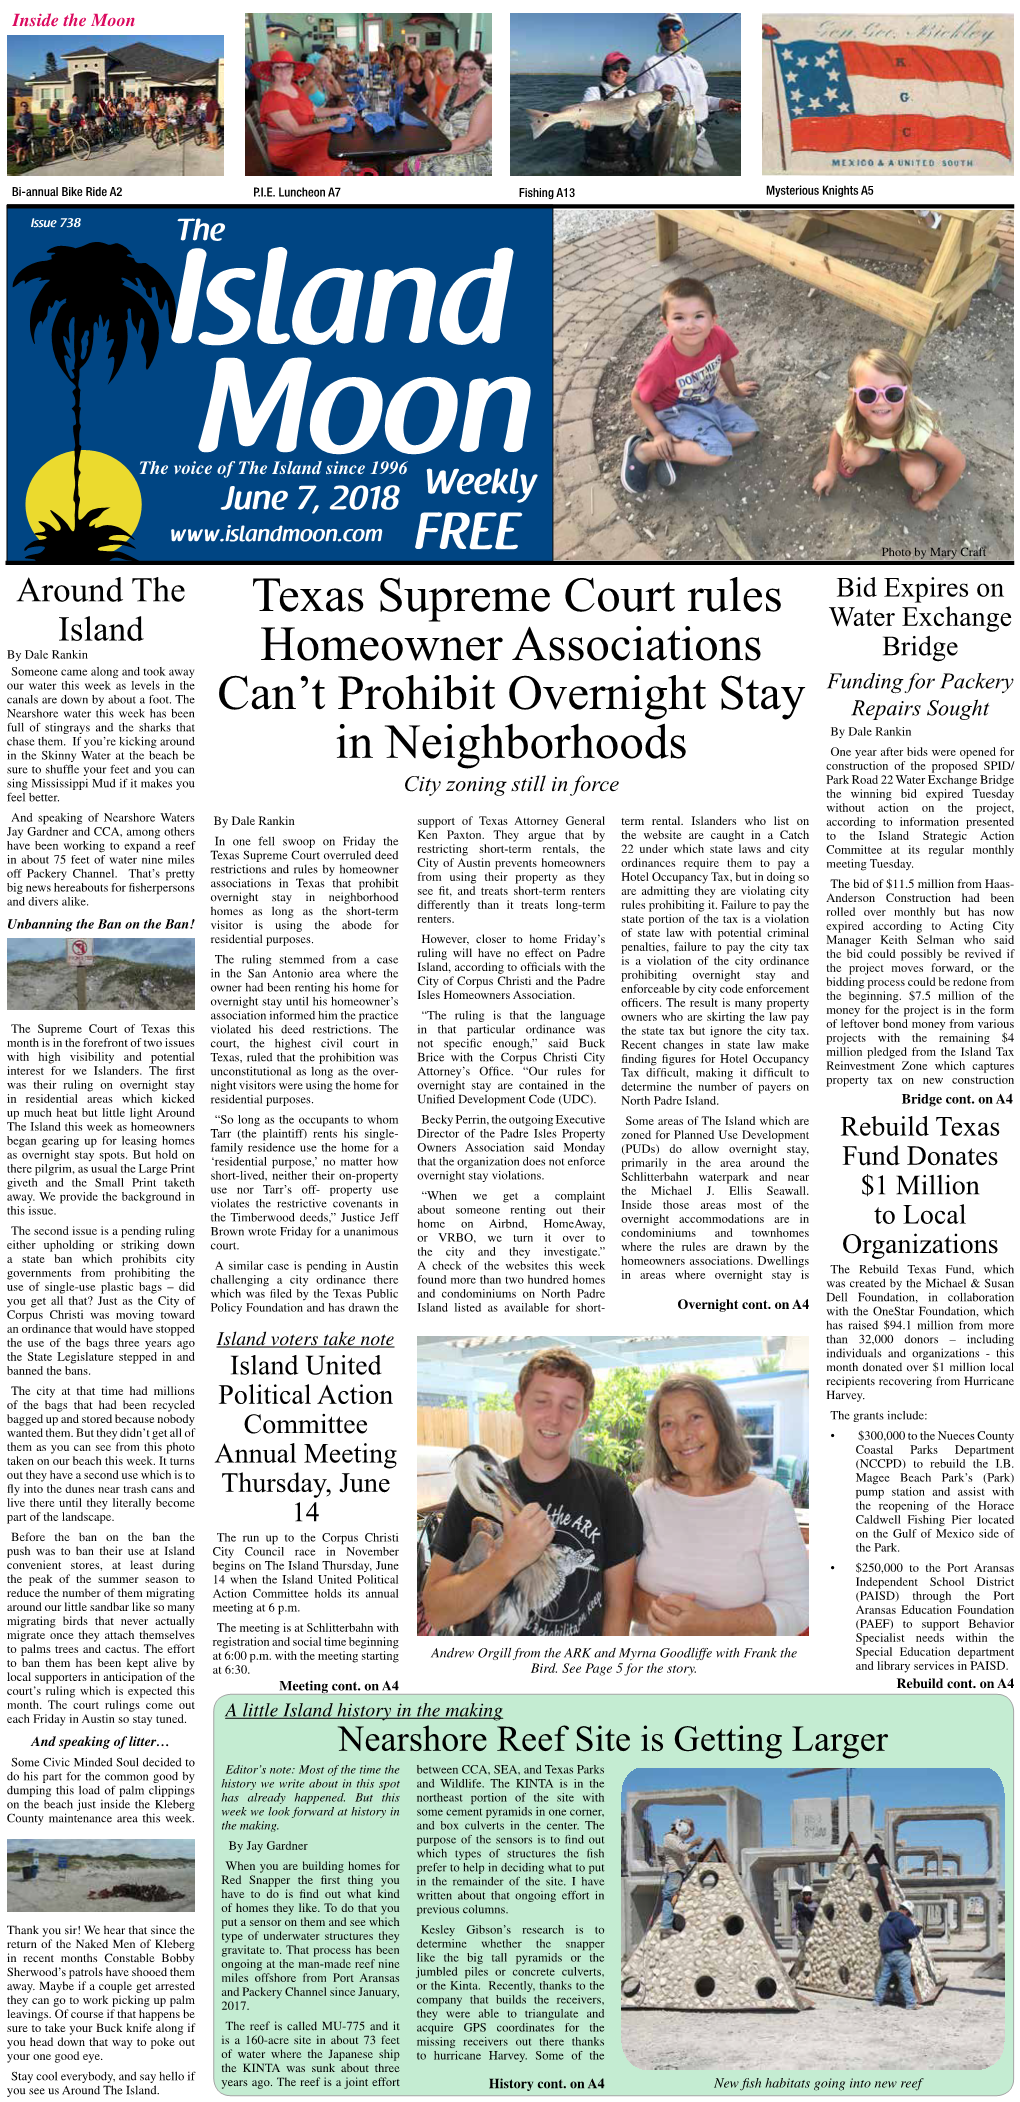 Texas Supreme Court Rules Homeowner Associations Can't